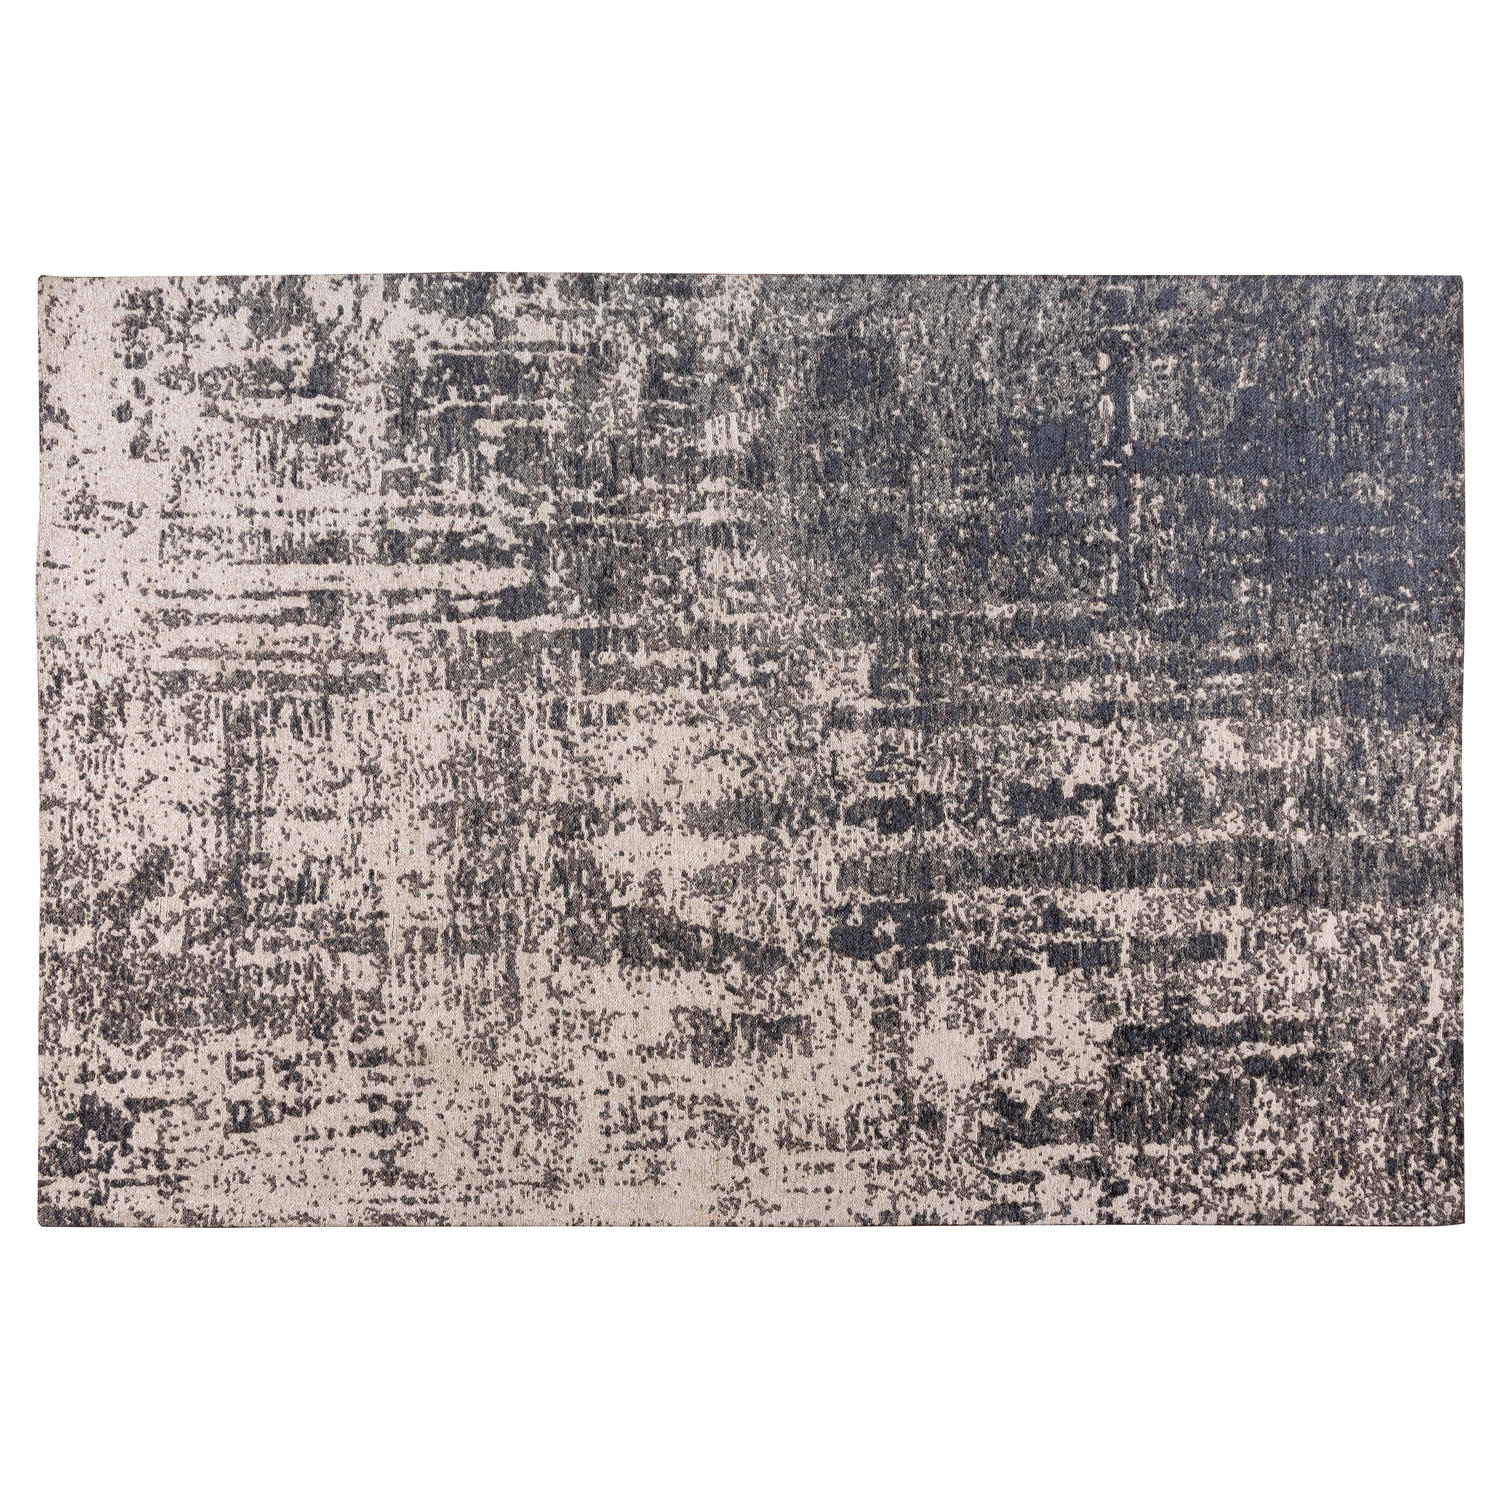 Aria Large Abstract Grey Rug - Image 1